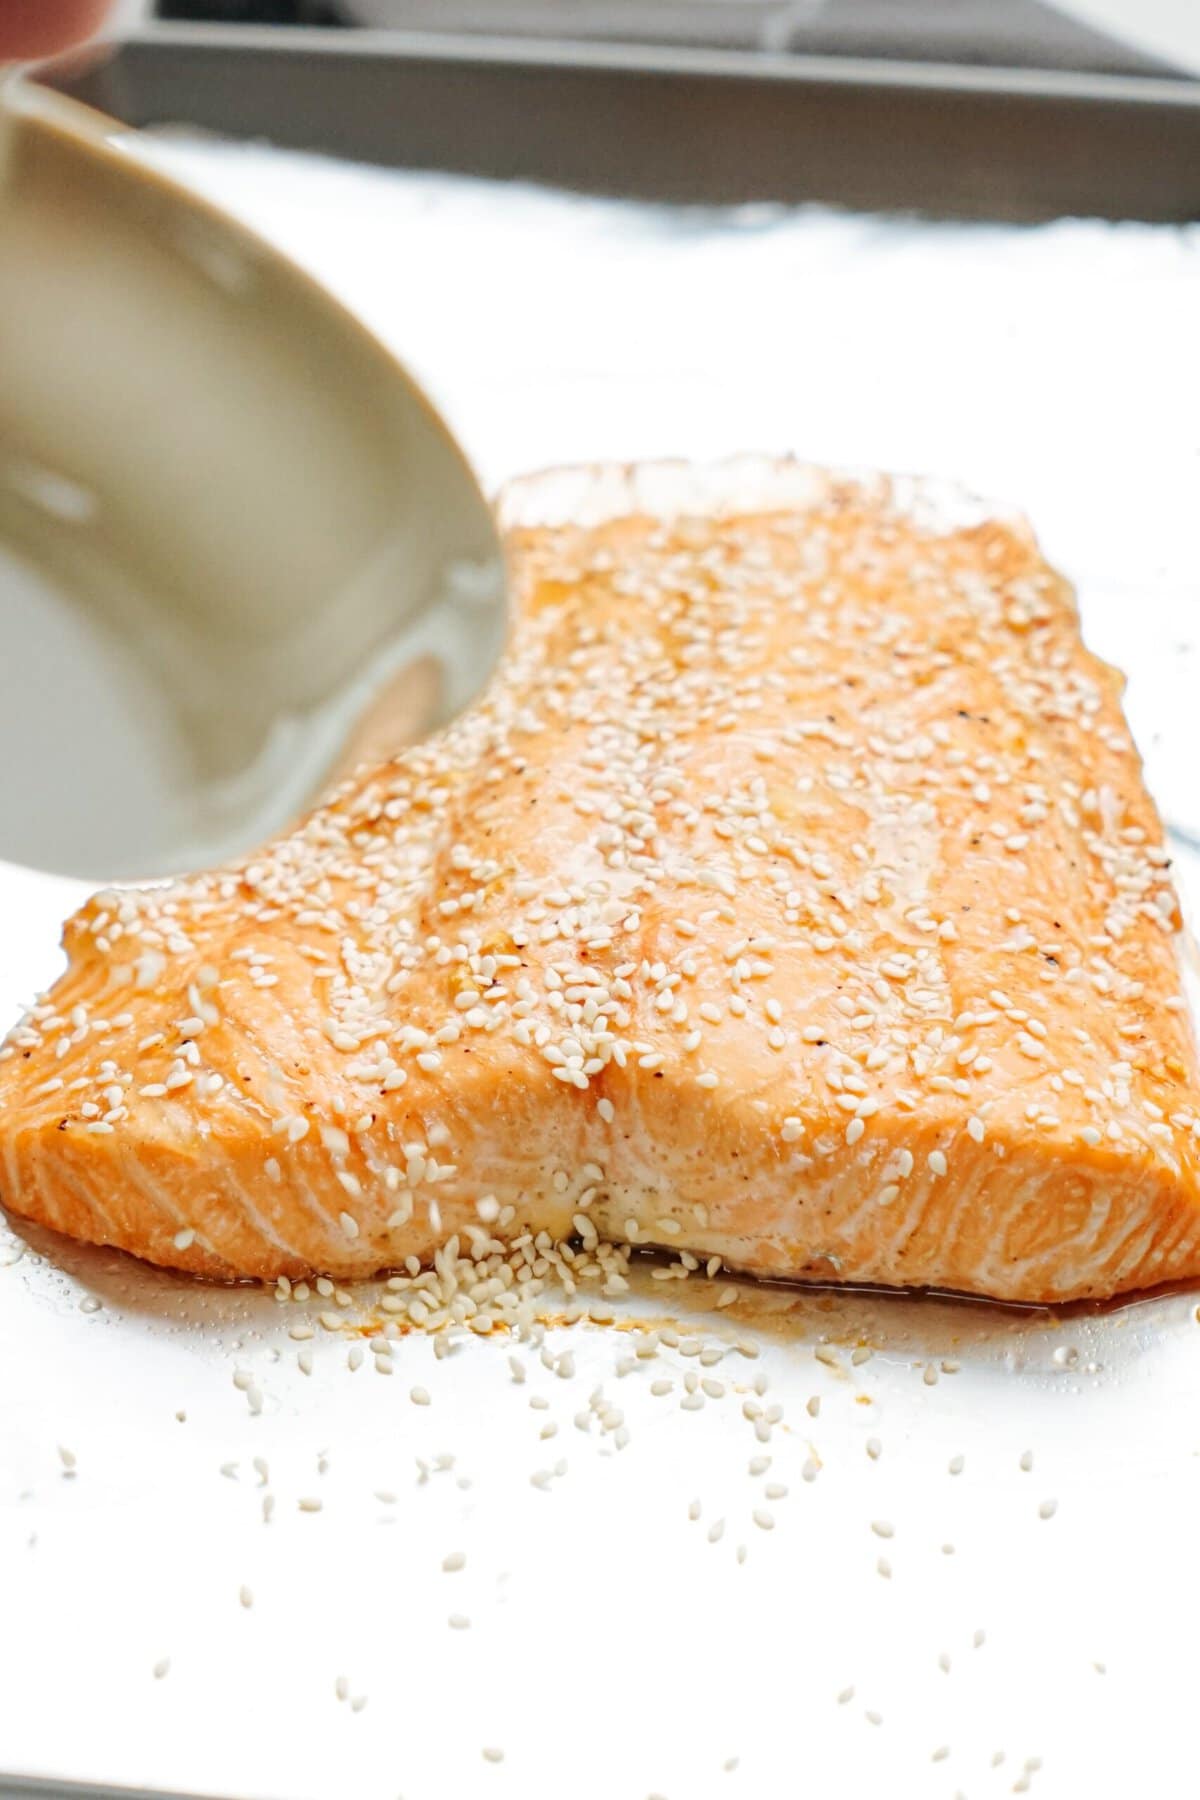 Salmon sprinkled with sesame seeds on a baking sheet.